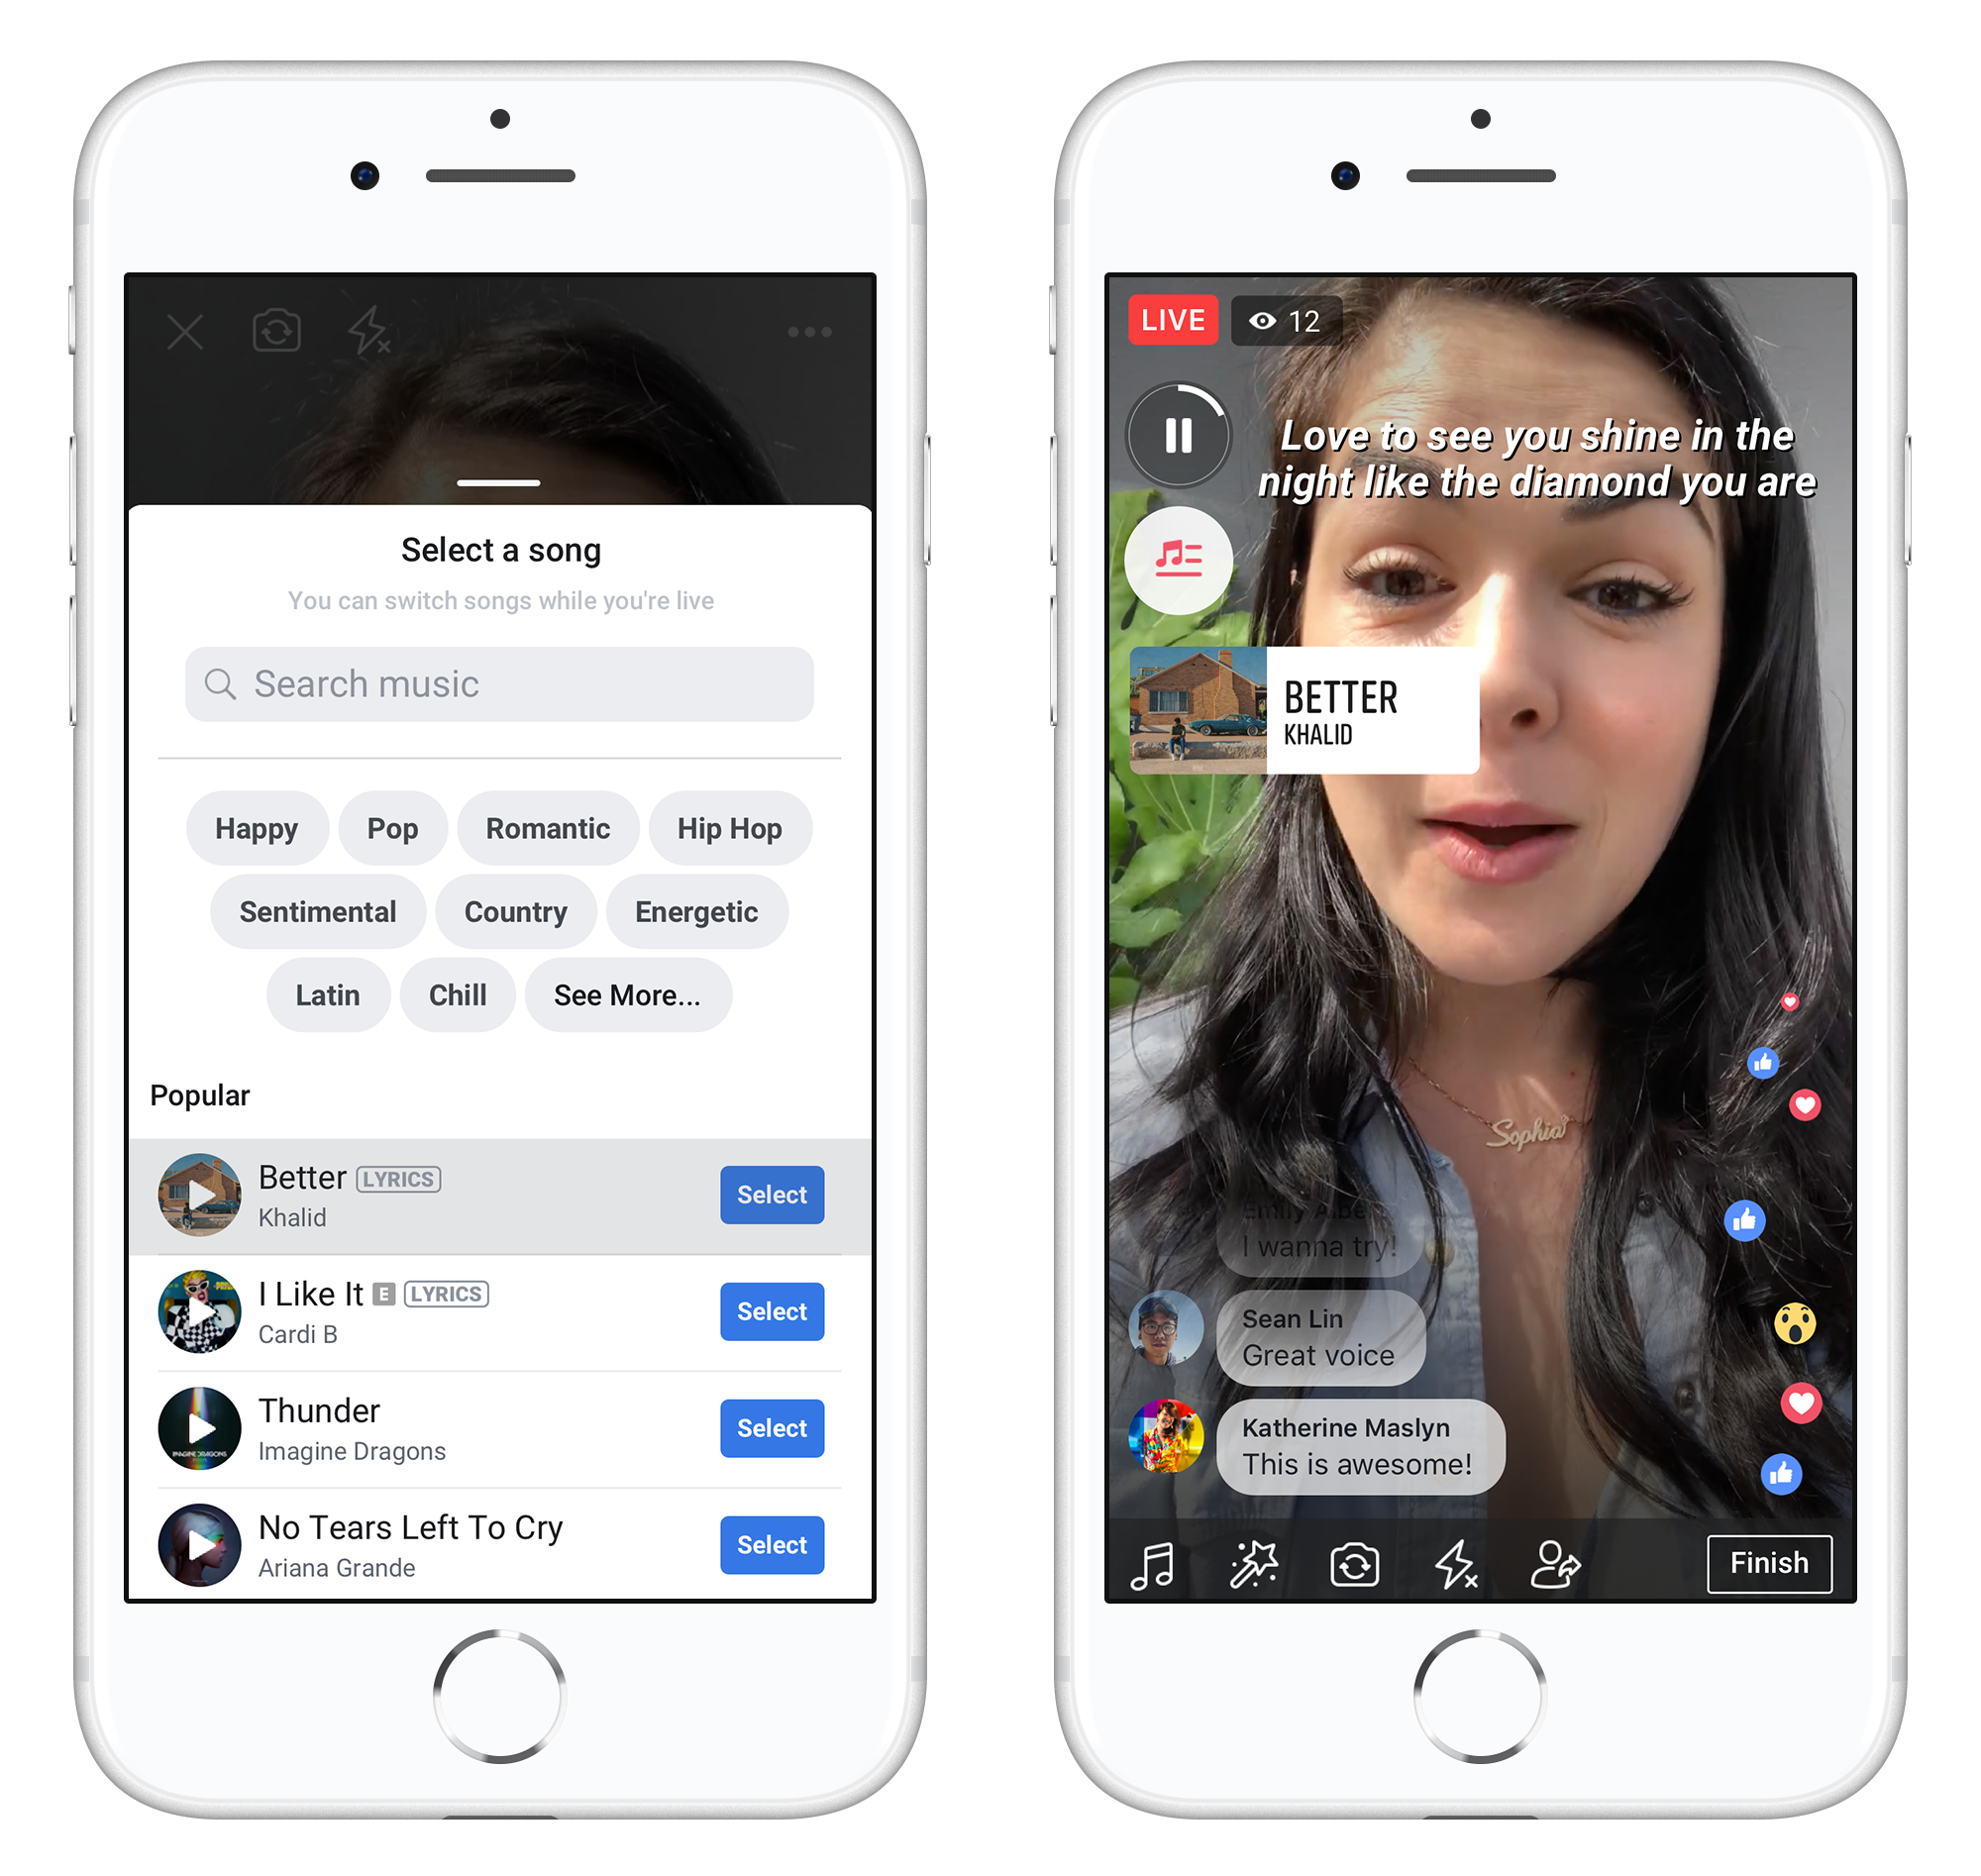 Music is coming to Facebook in exciting new ways